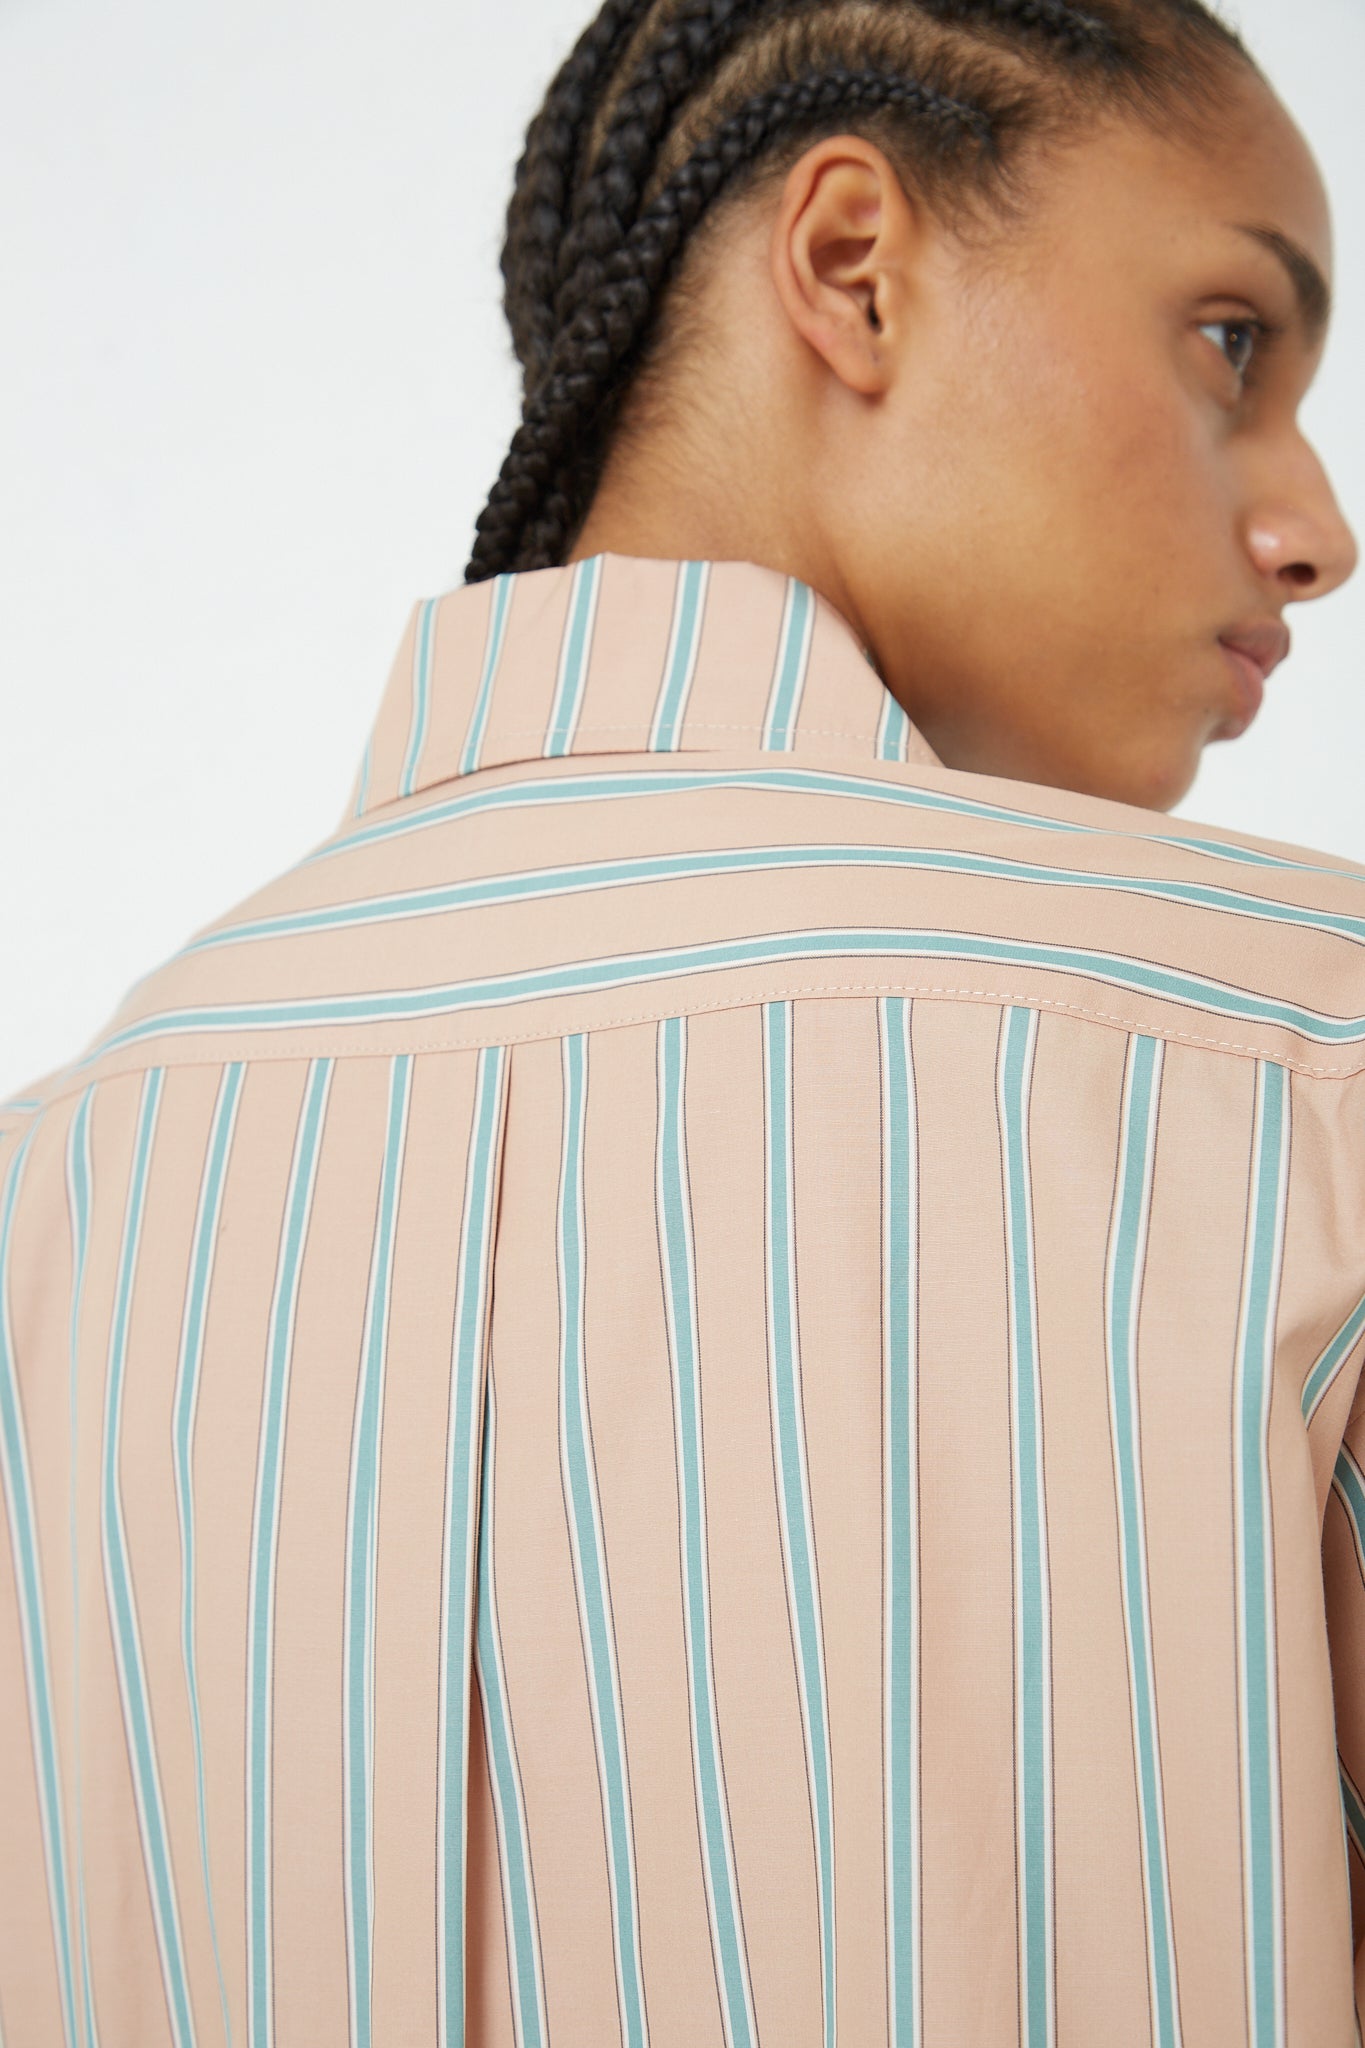 The back of a woman wearing a Rachel Comey Stripe Broadcloth Risa Top in Terracotta, a menswear-inspired shirt in yarn-dyed striped cotton shirting.